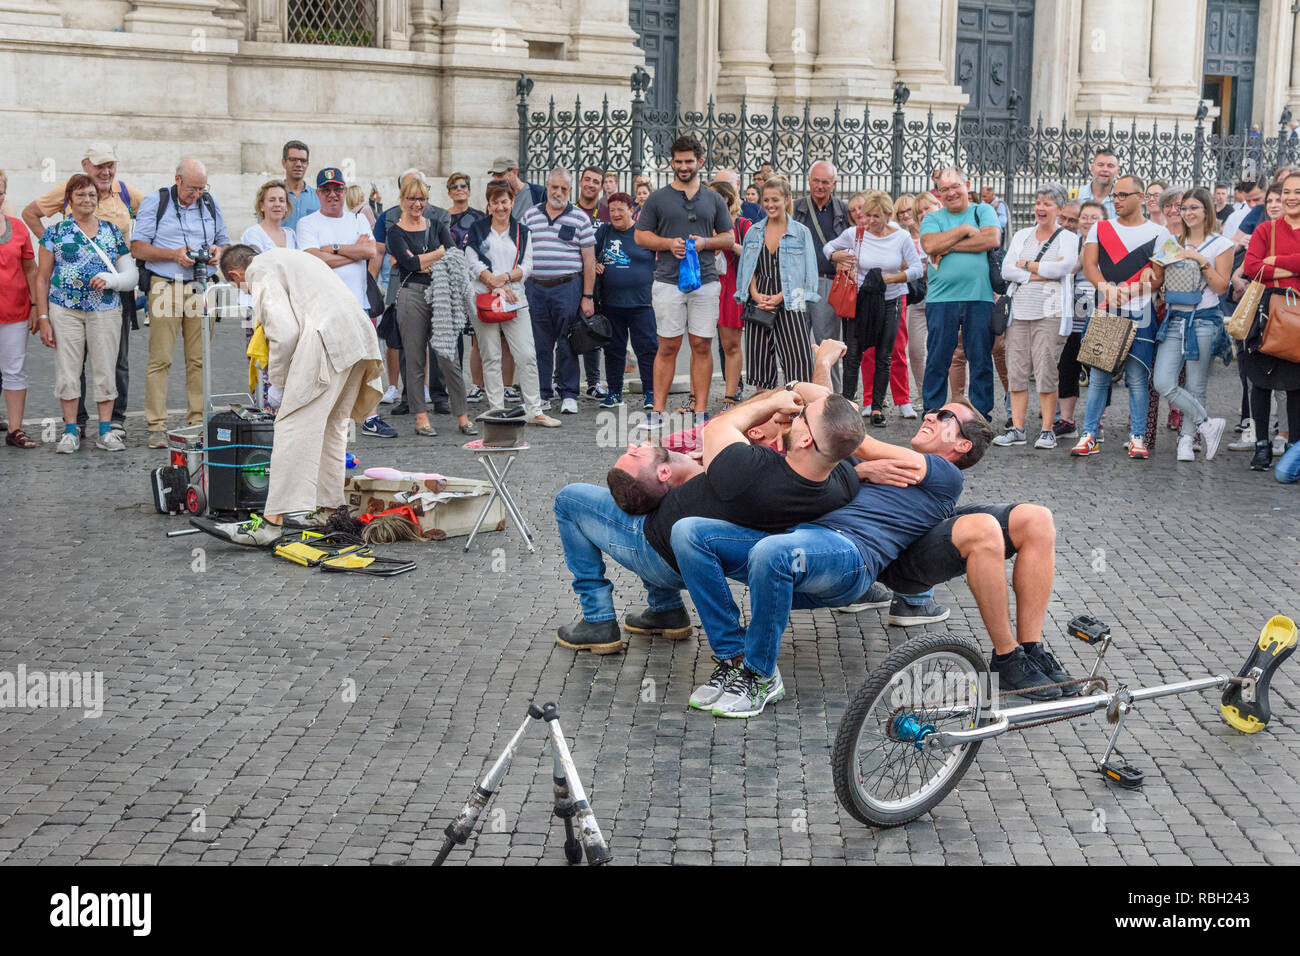 Rome, Italy - October 04, 2018: Street performance with the participation of comedian and ordinary people in Piazza Navona Stock Photo